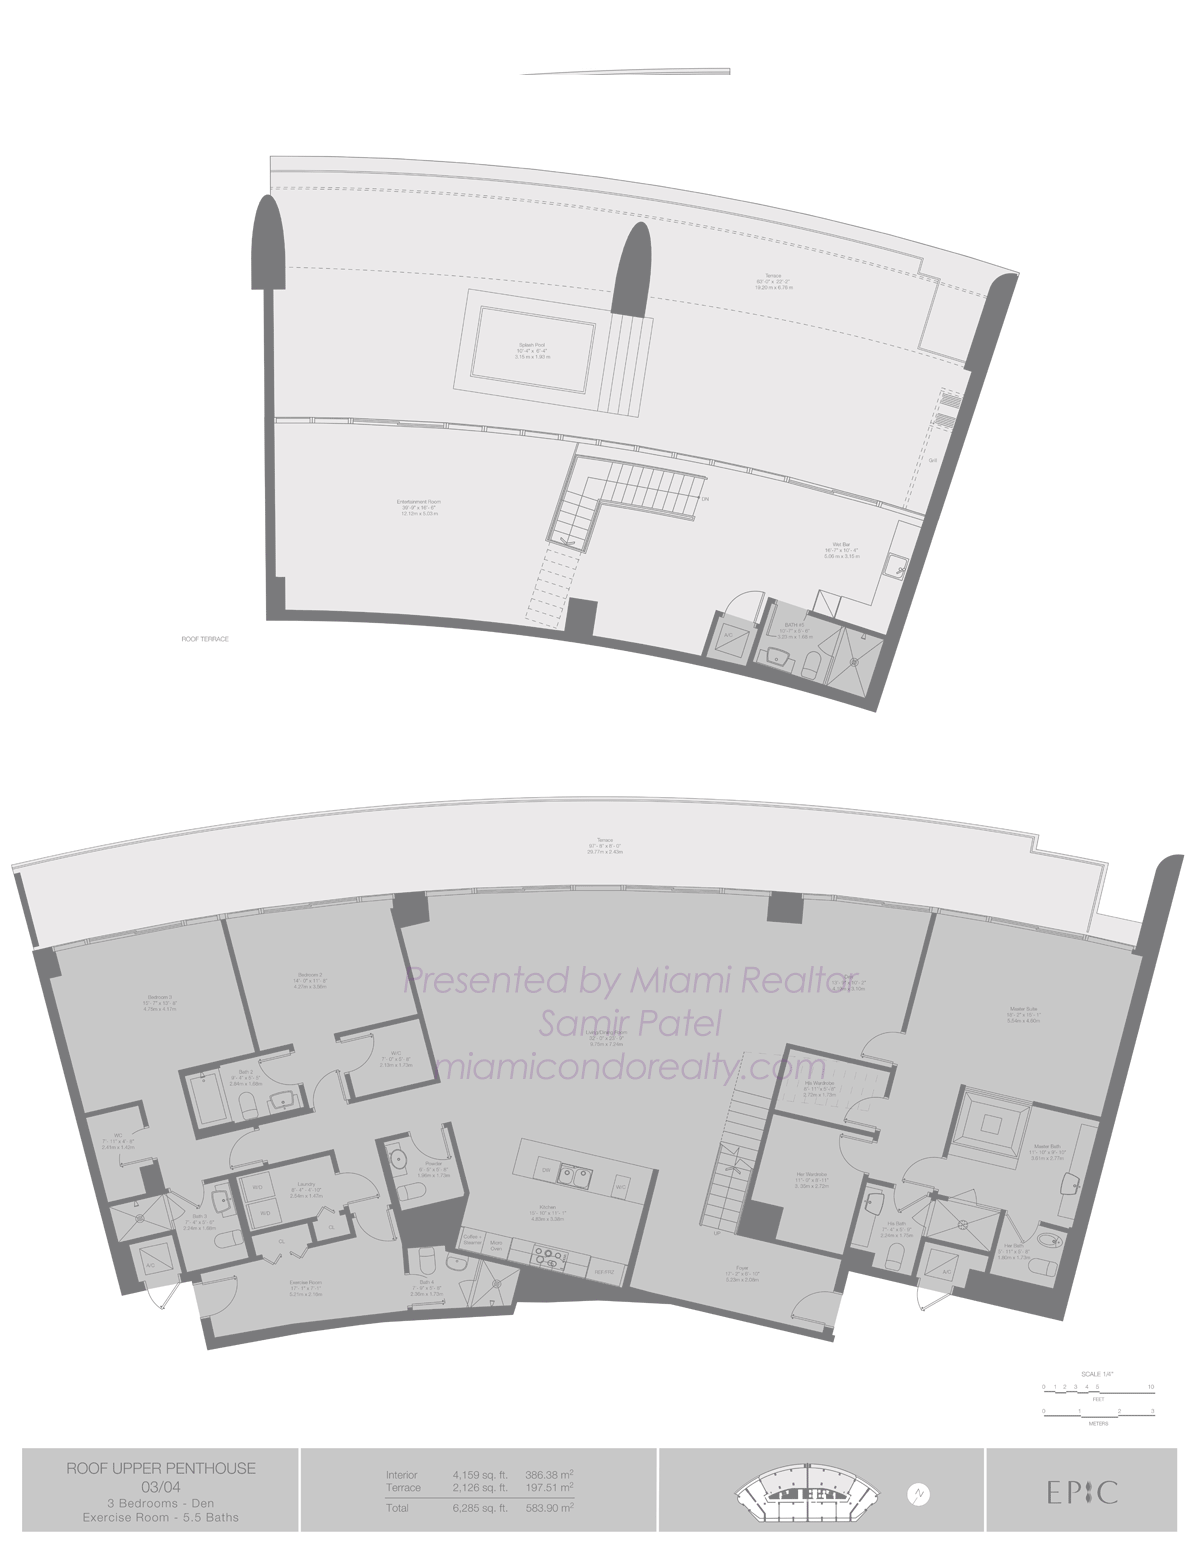 EPIC Residences Upper Penthouse Floorplans for Units 5403 and 5404